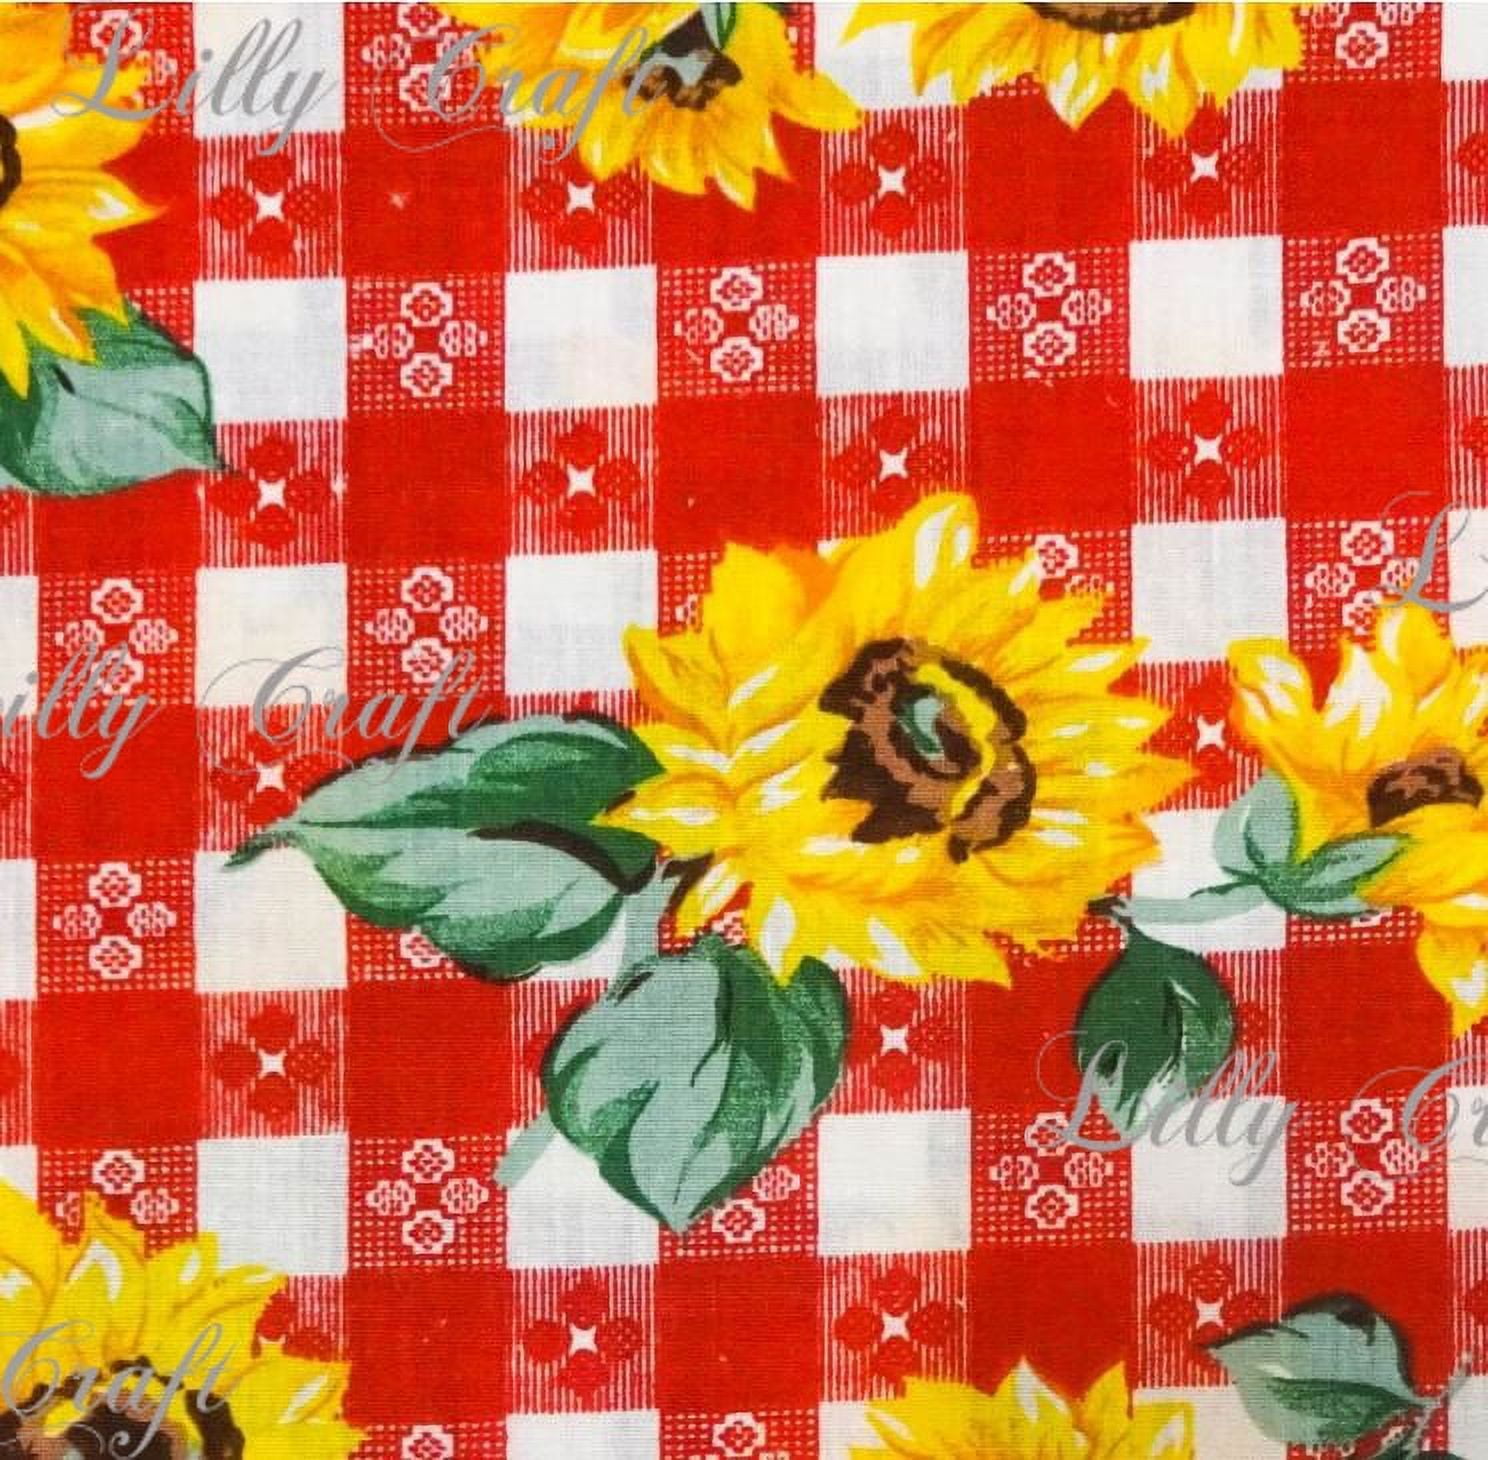 Poly Cotton Printed Fabric Sunflower Flower / White / Sold By The Yard Shop  Poly Cotton Printed Fabric Sunflower Flower White by the Yard : Online  Fabric Store by the yard